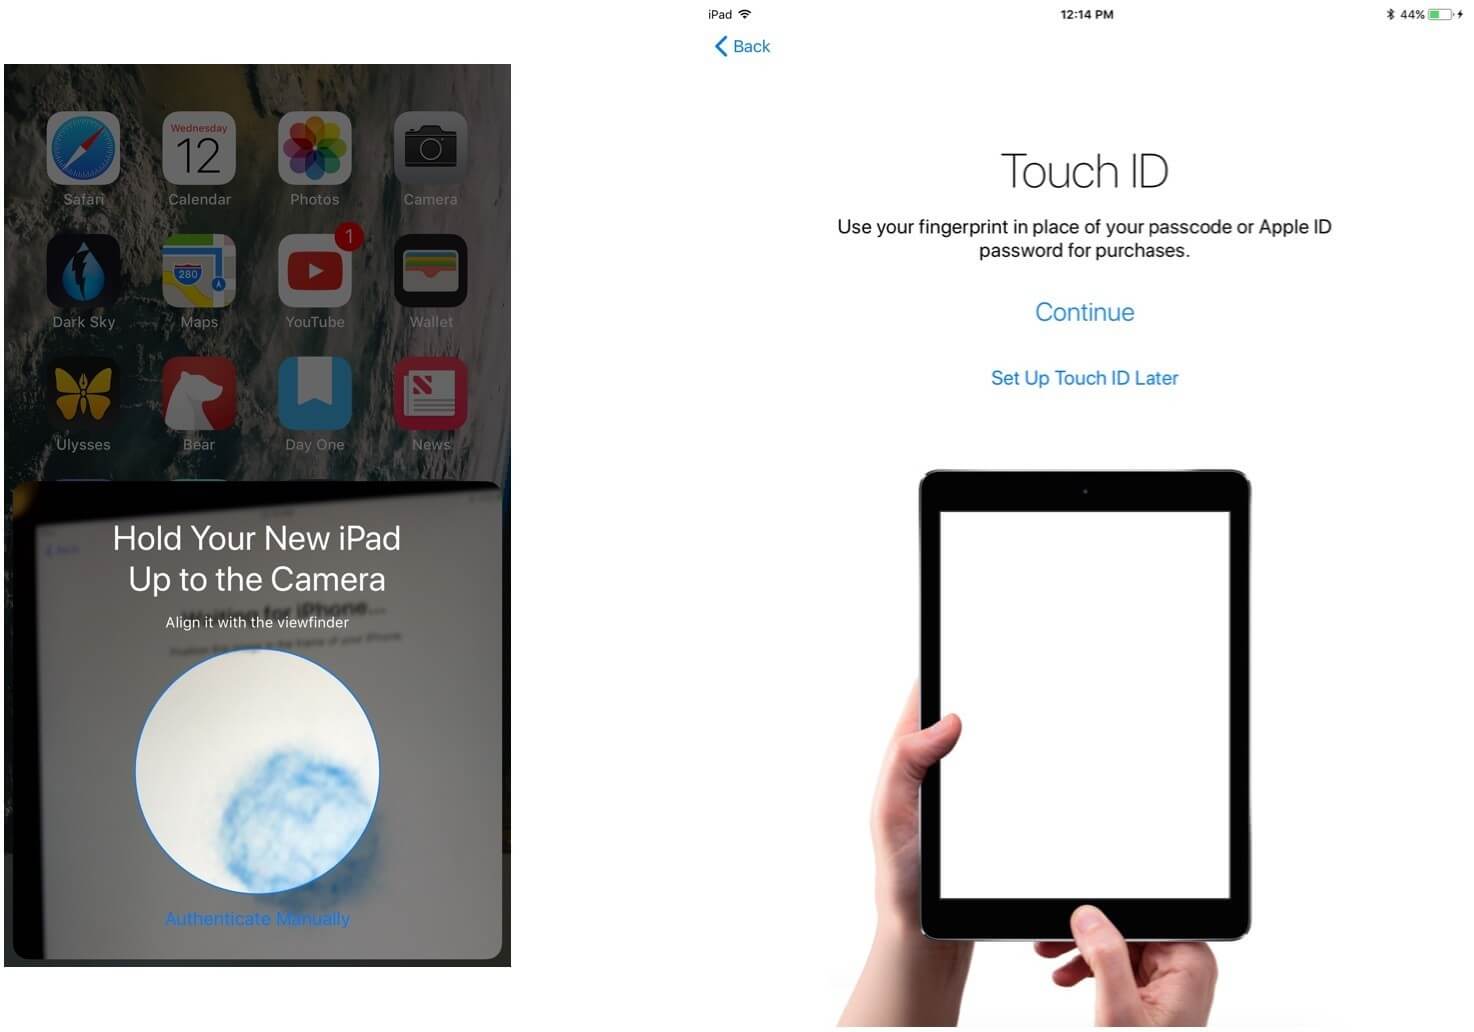 set up Touch ID